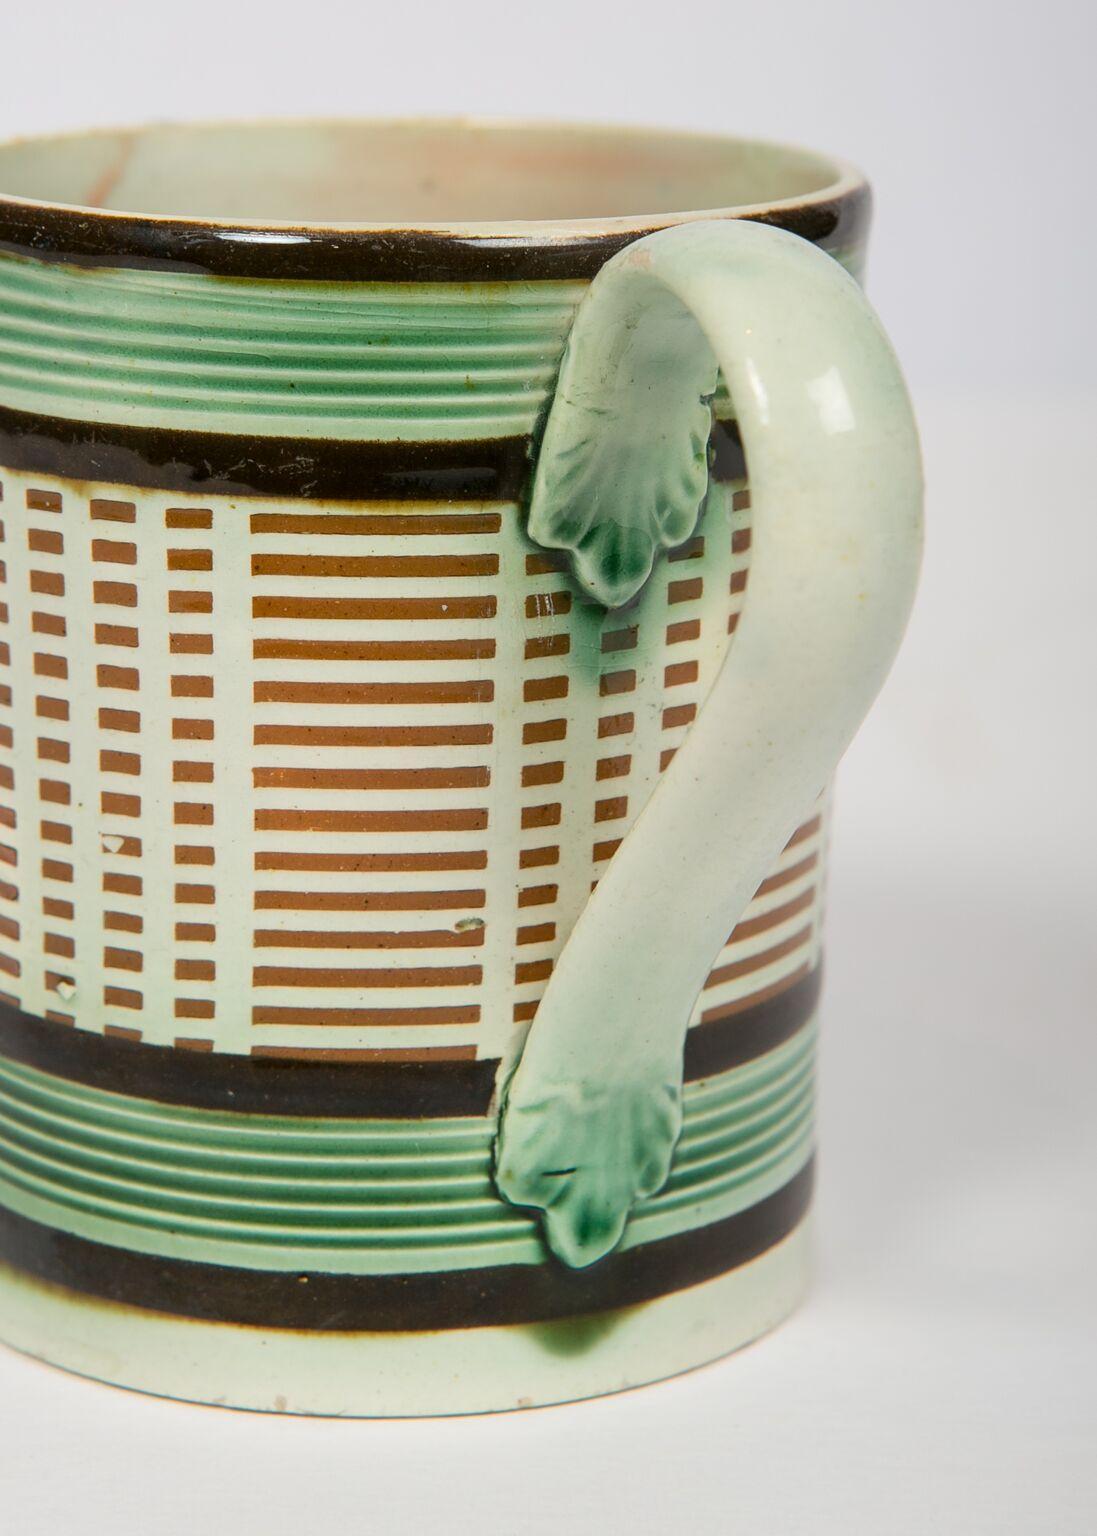 A Mochaware mug, England, circa 1815
Decorated with green glazed reeded bands, midnight brown slip bands and inlaid light brown long and short engine-turned slip lines.
Dimensions: Diameter 3